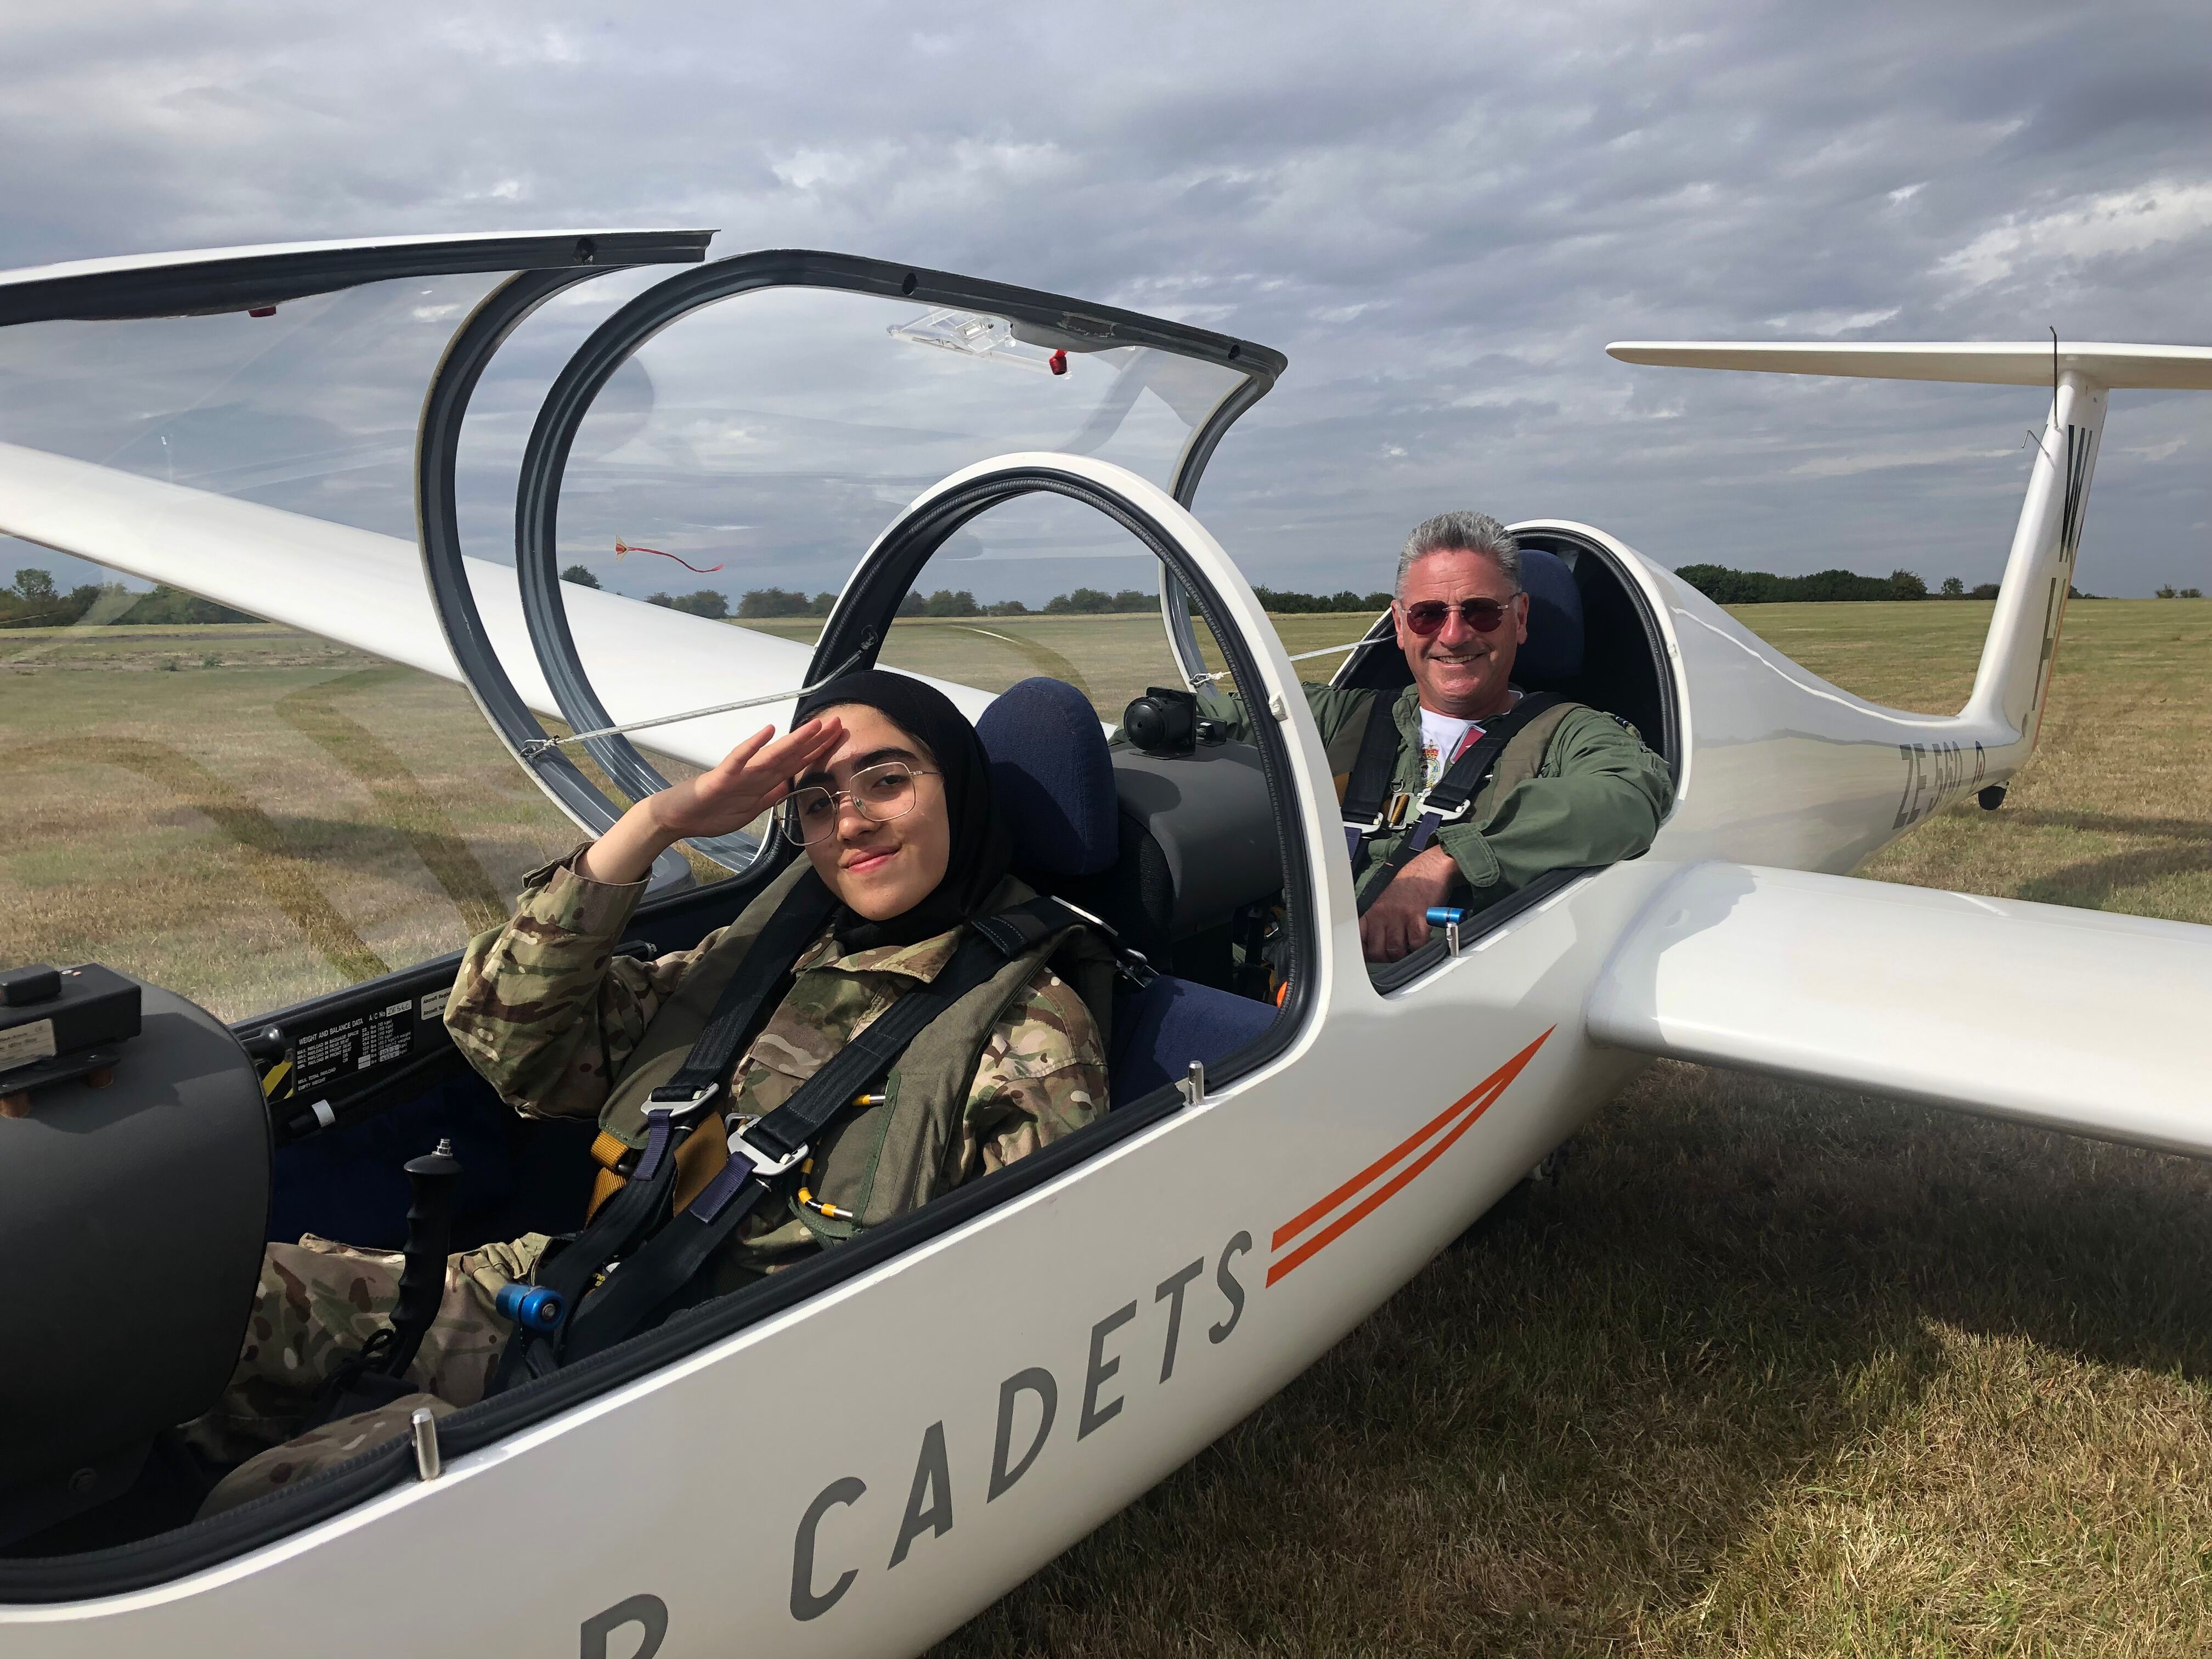 Volunteer and cadet in a glider before take-off